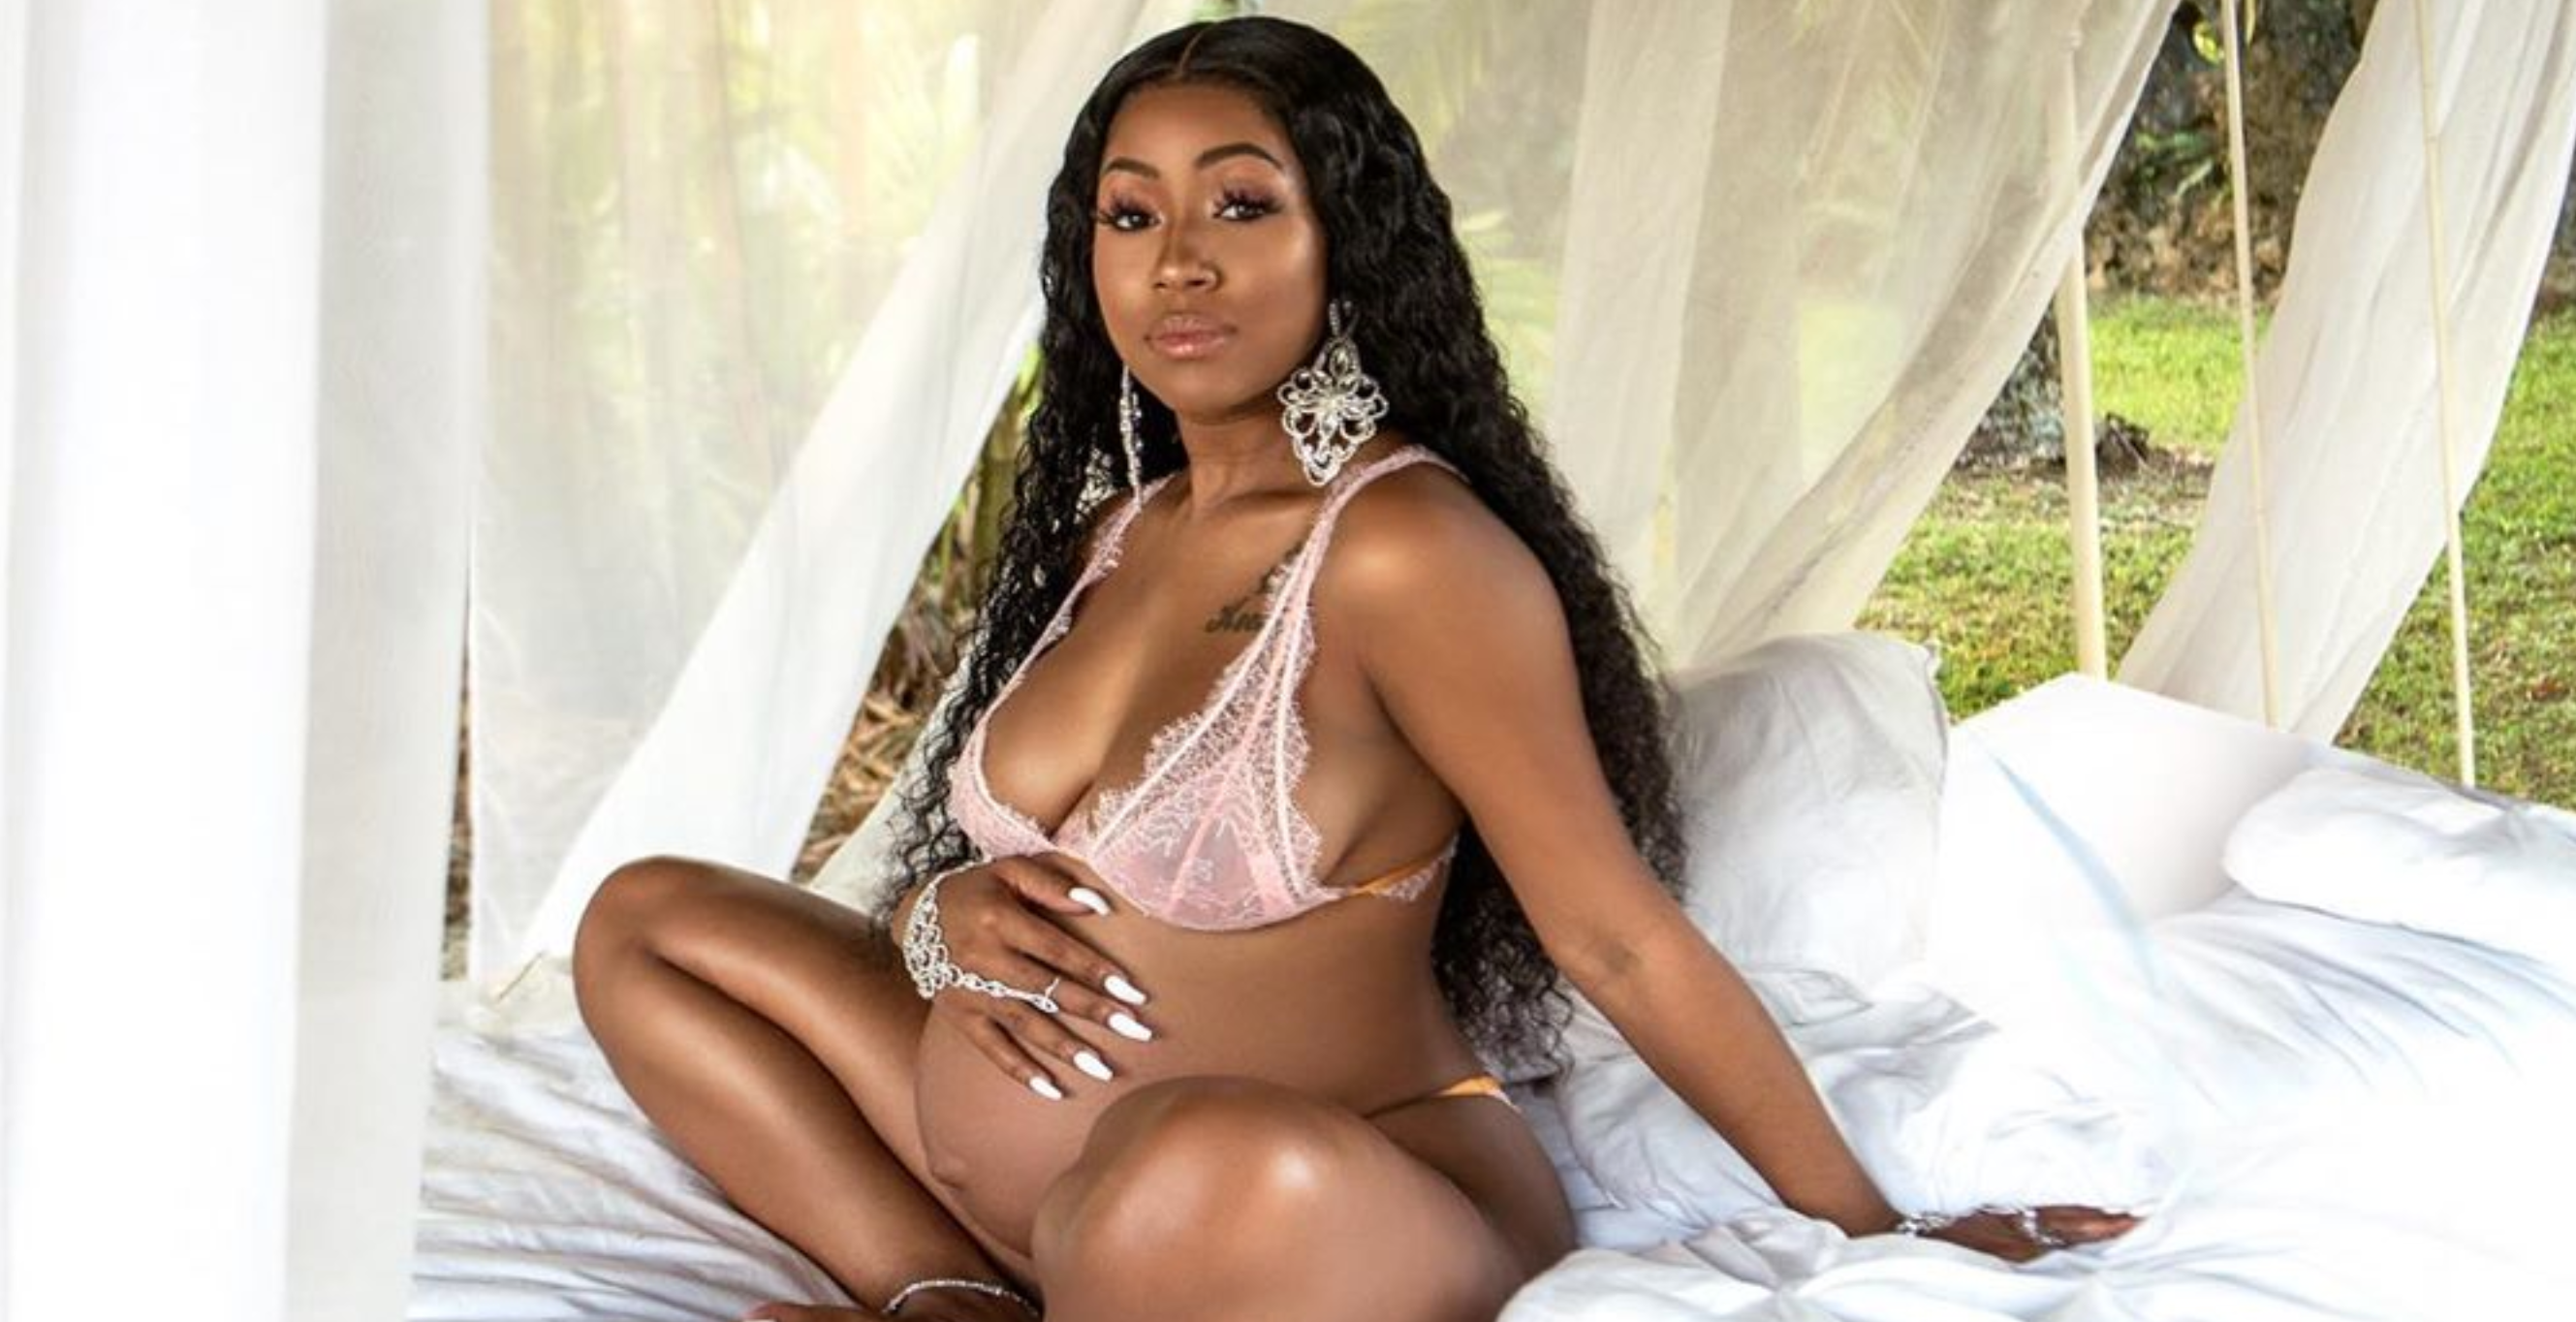 City Girls Rapper Yung Miami Looked So Angelic In Her Last Maternity Shoot